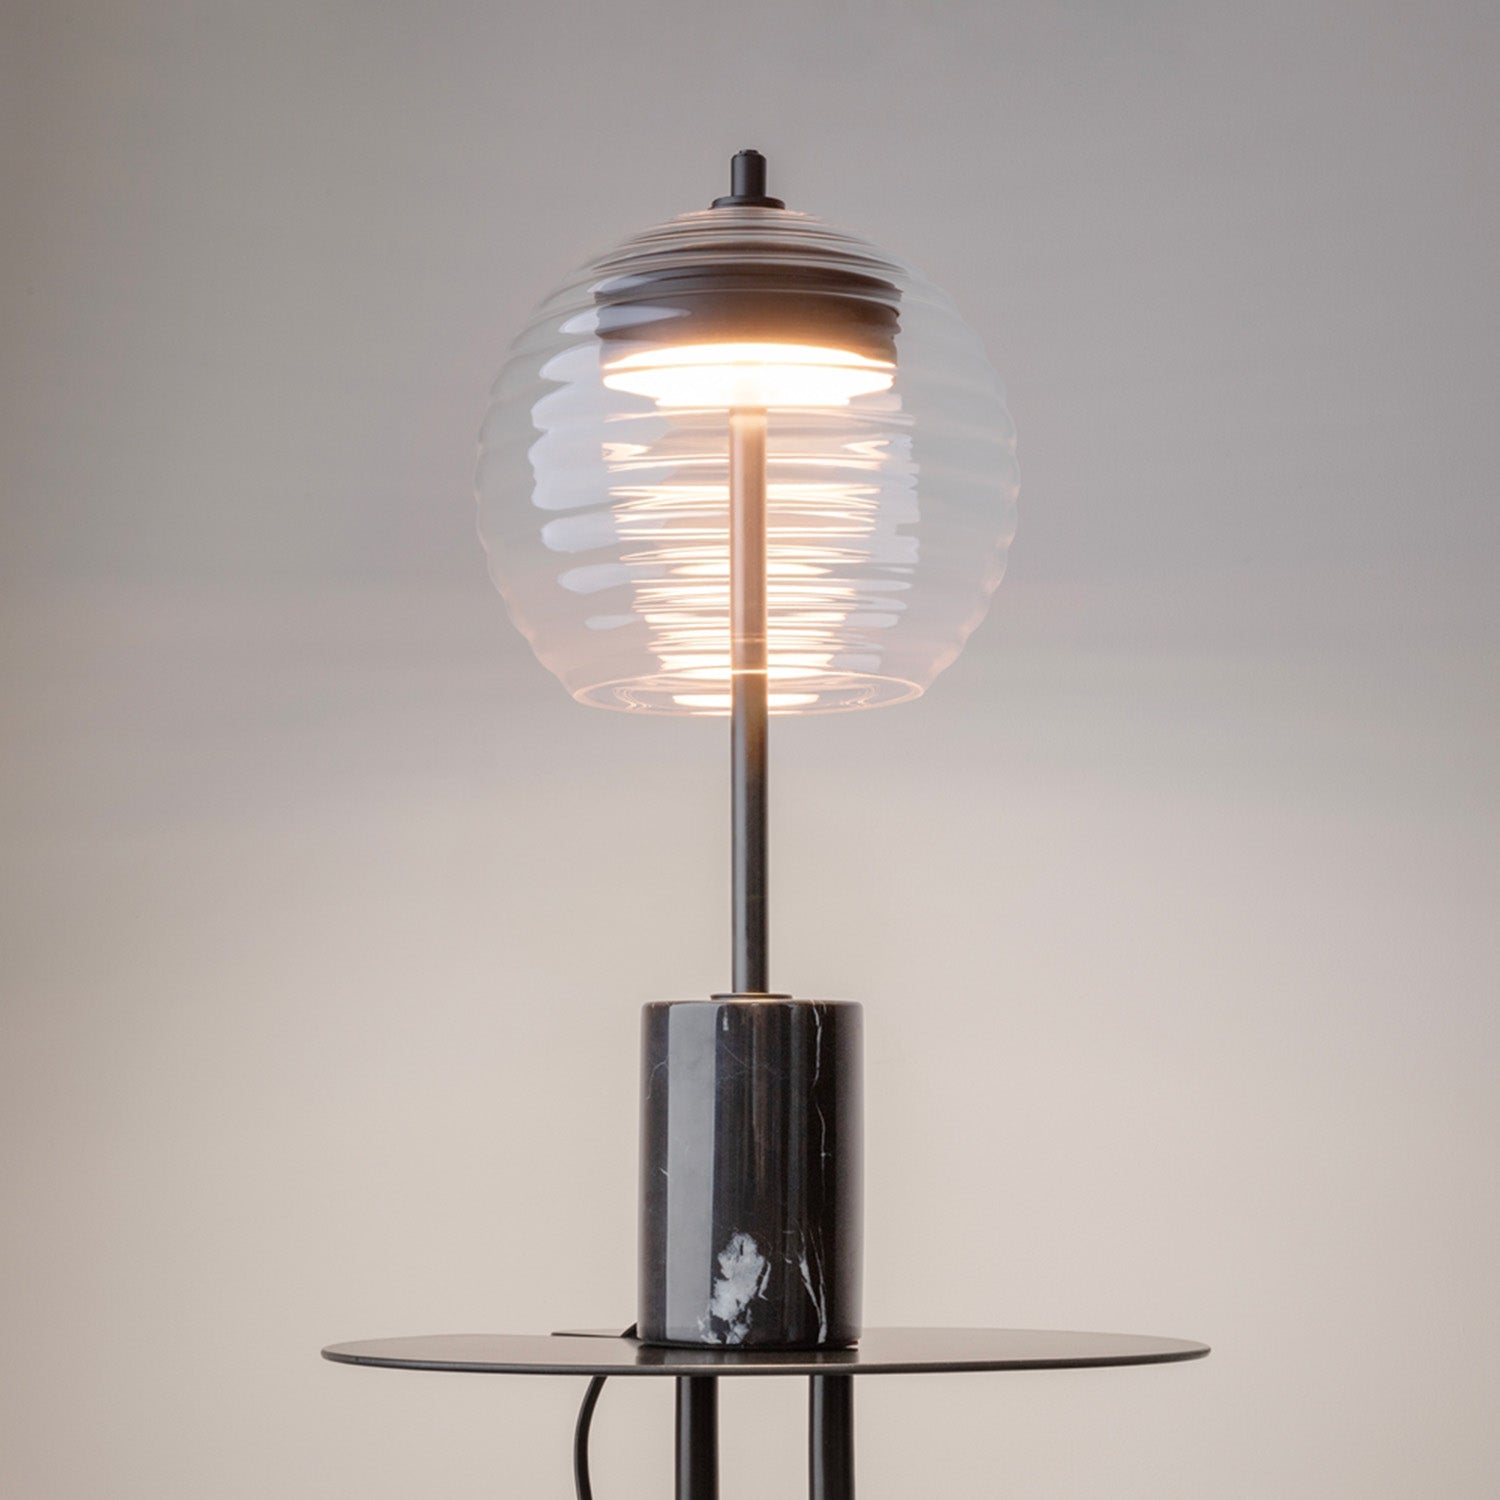 MYSTIC - Black marble and glass effect table lamp